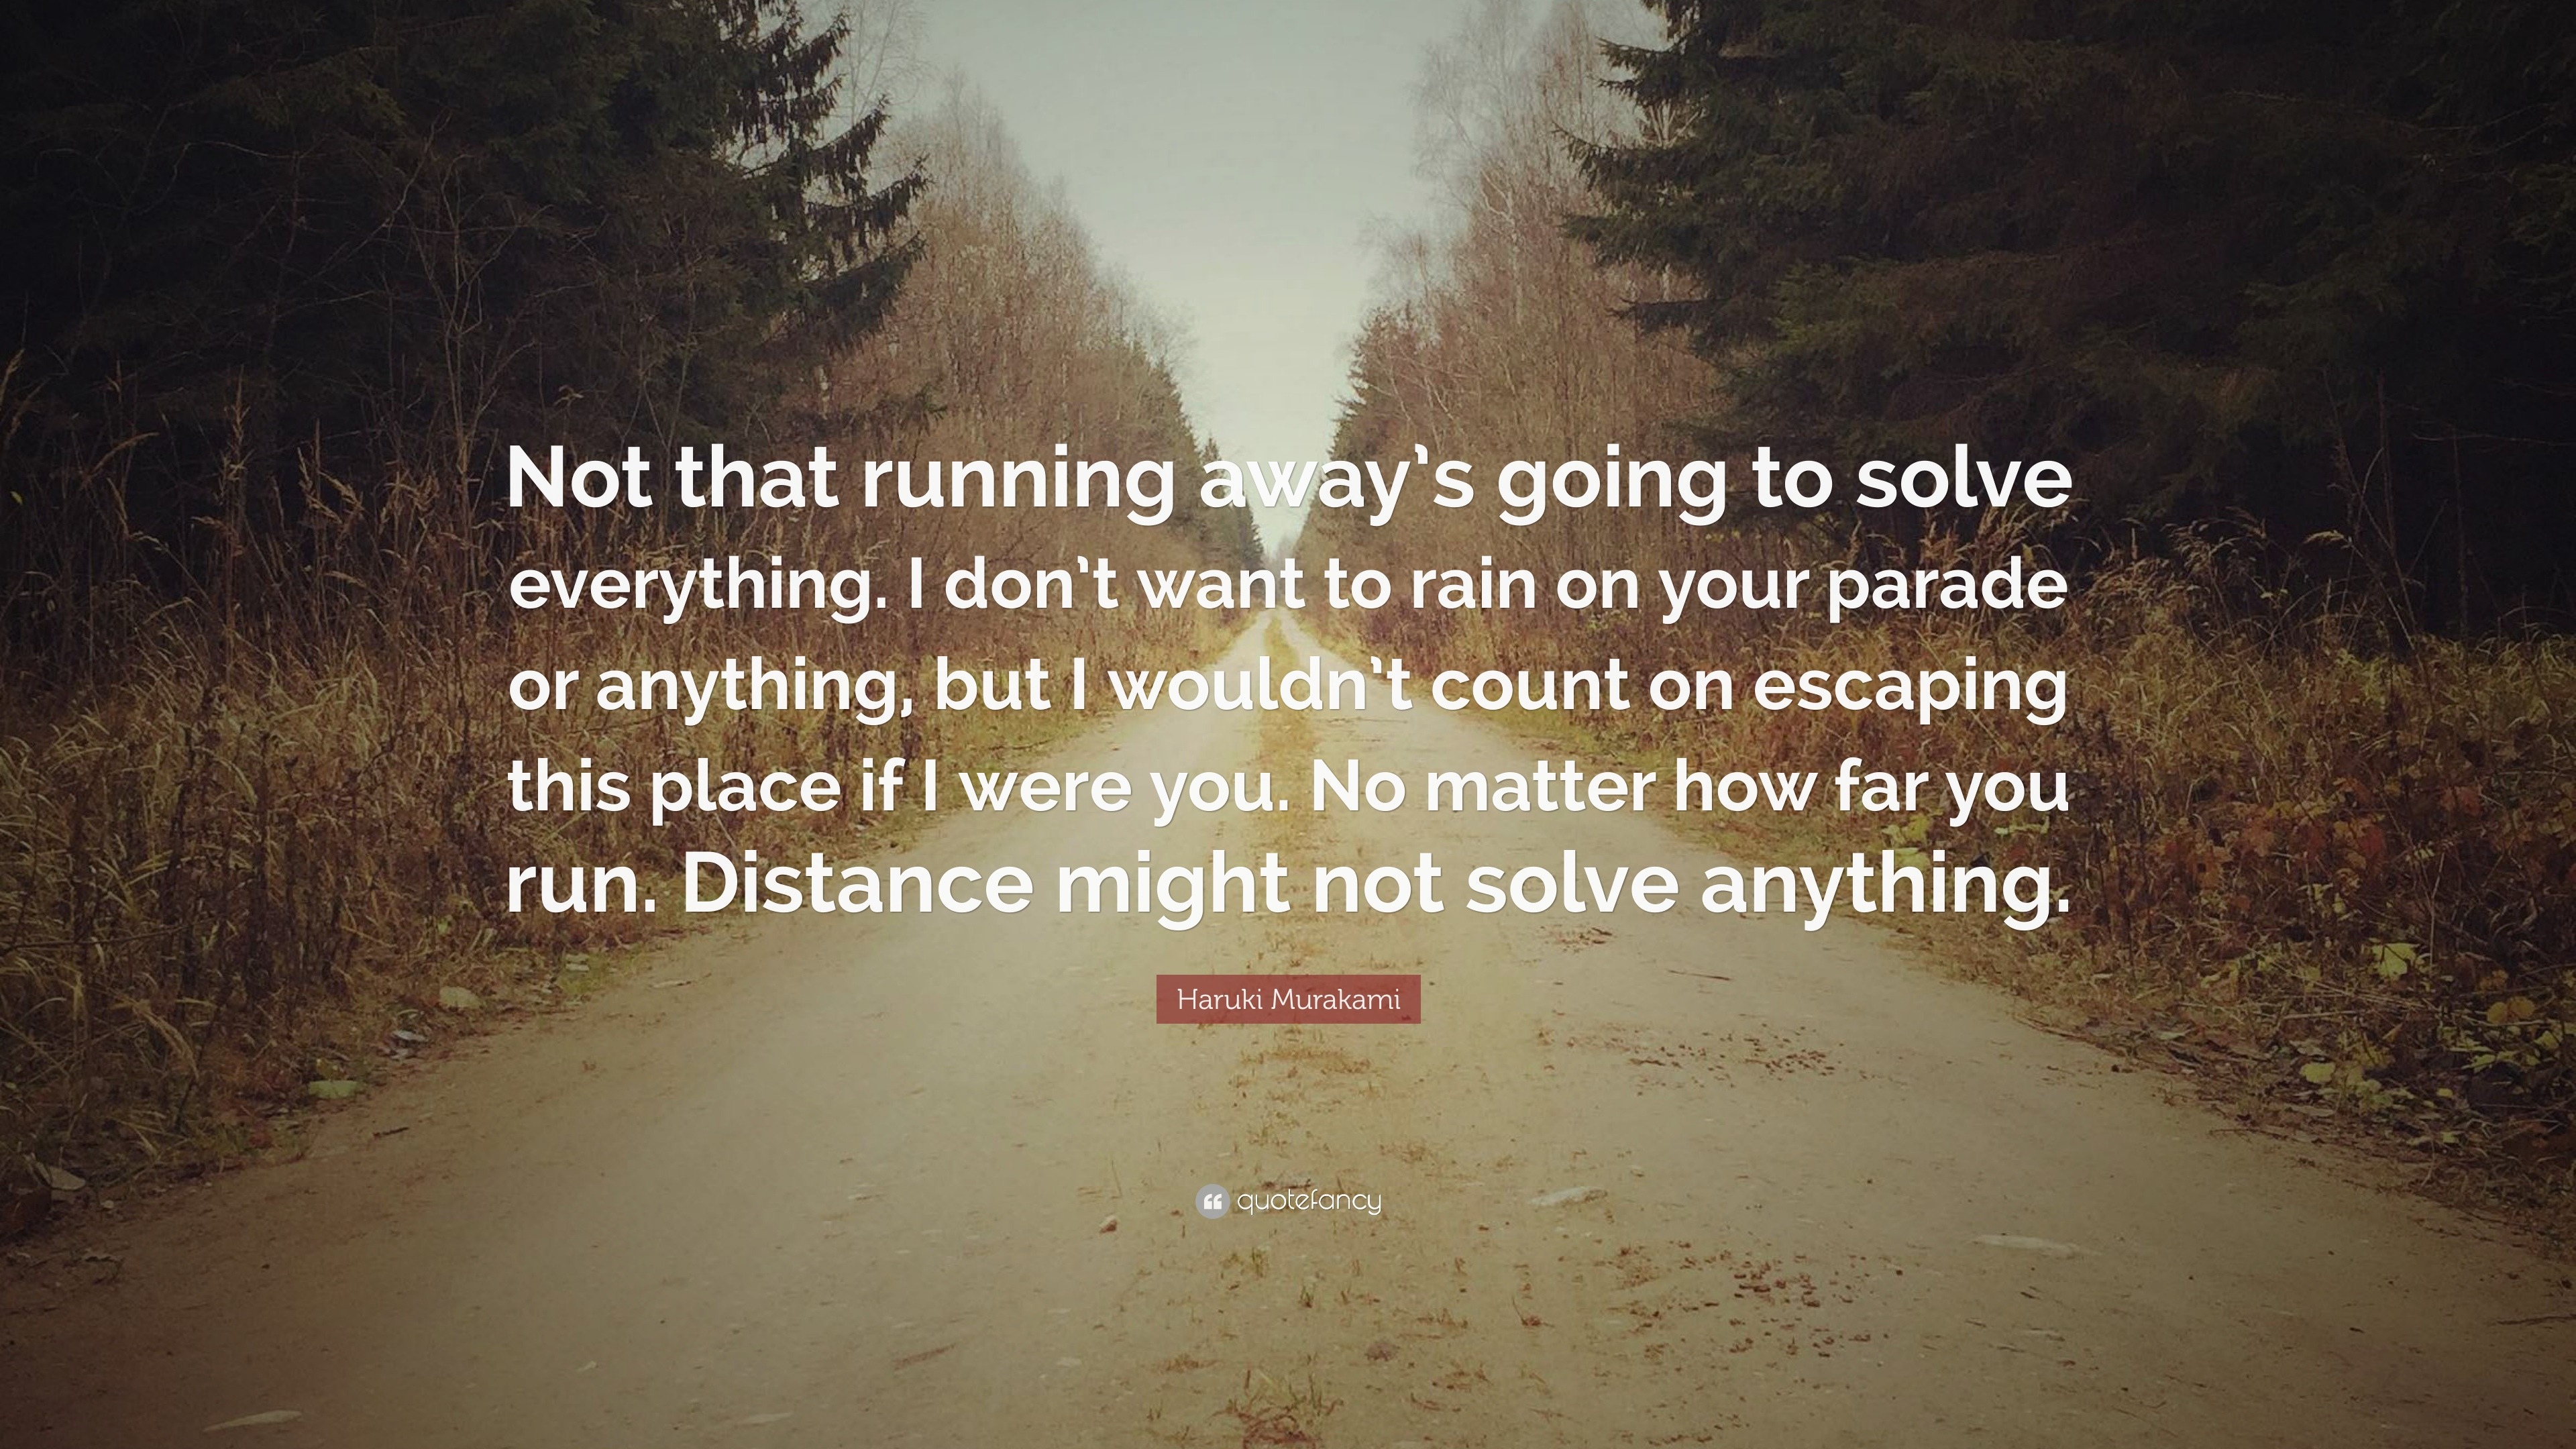 Get Here Quotes About Running Away - Allquotesideas